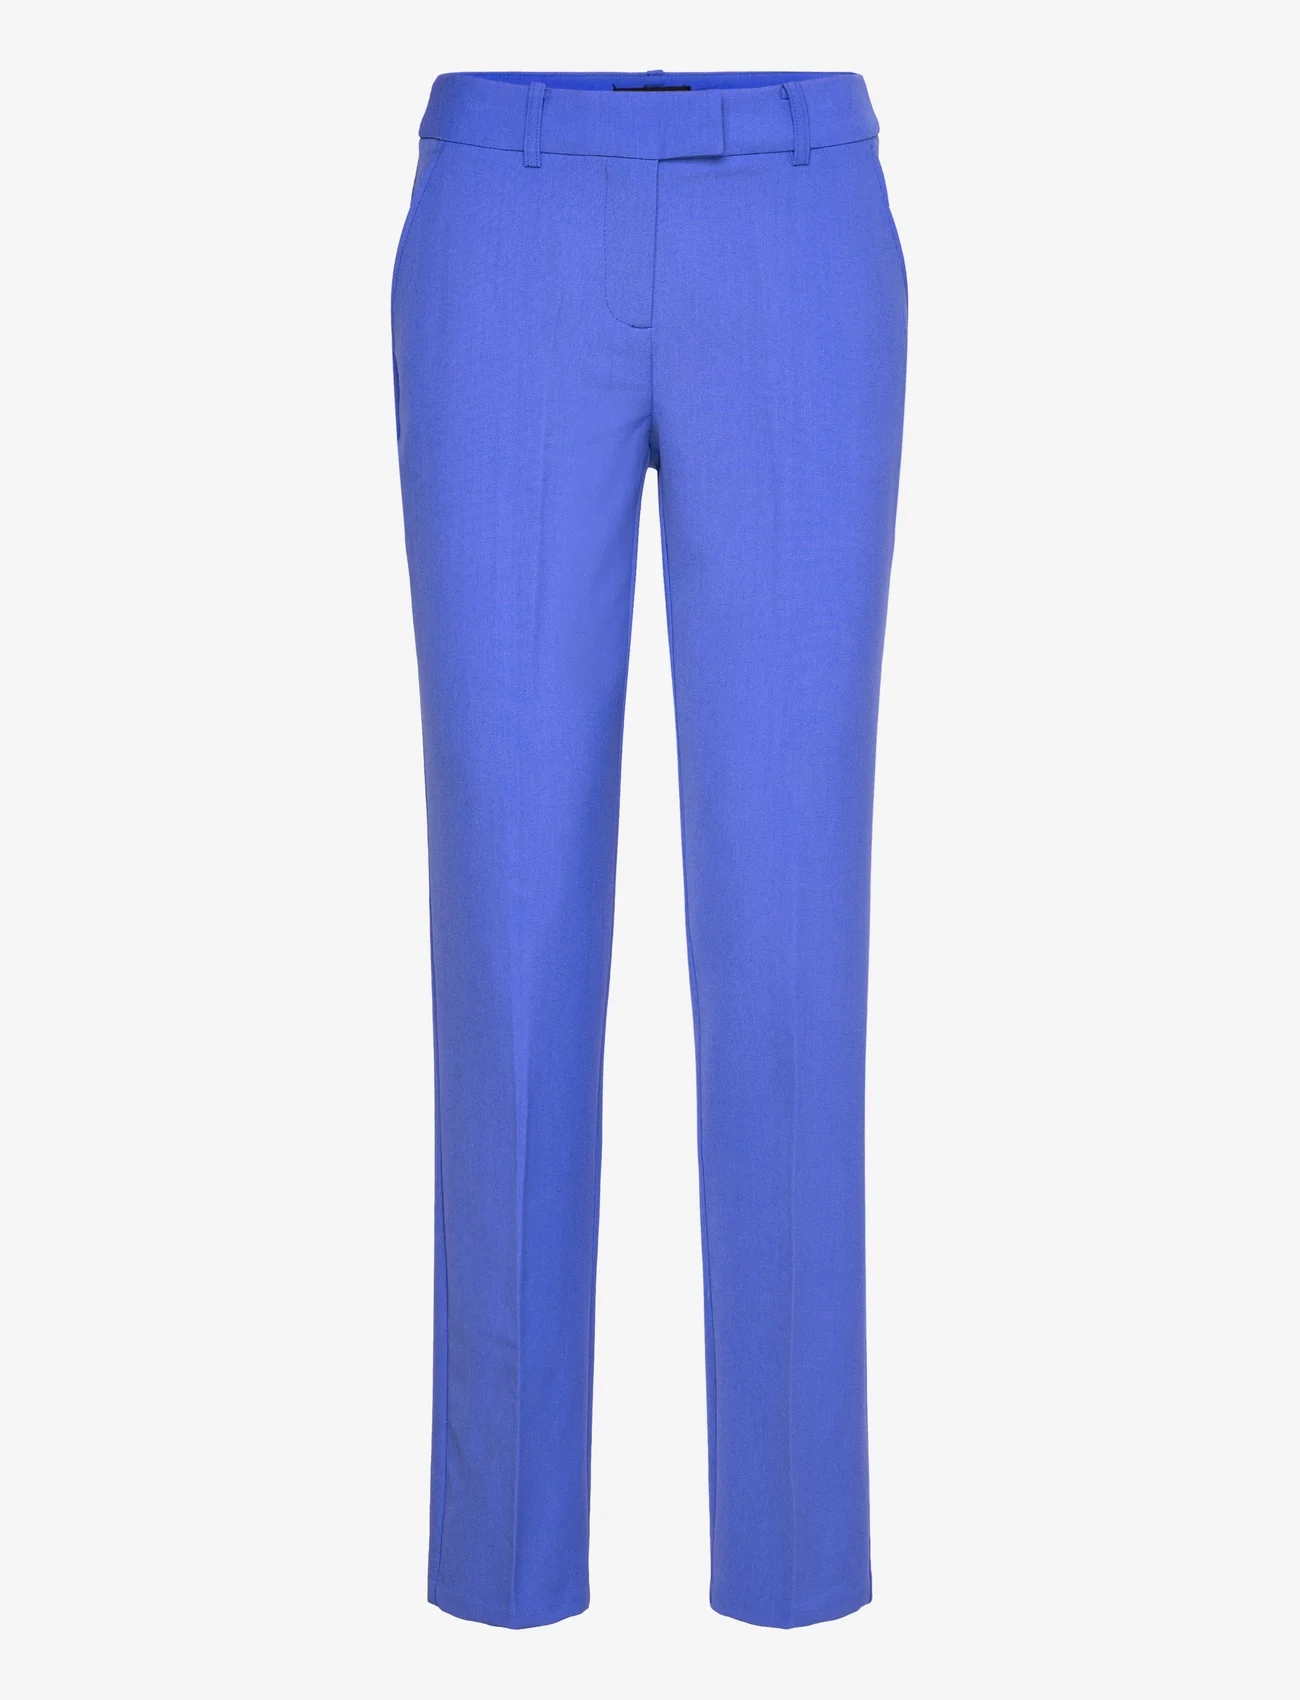 Brandtex - Suiting pants - tailored trousers - clear blue - 0